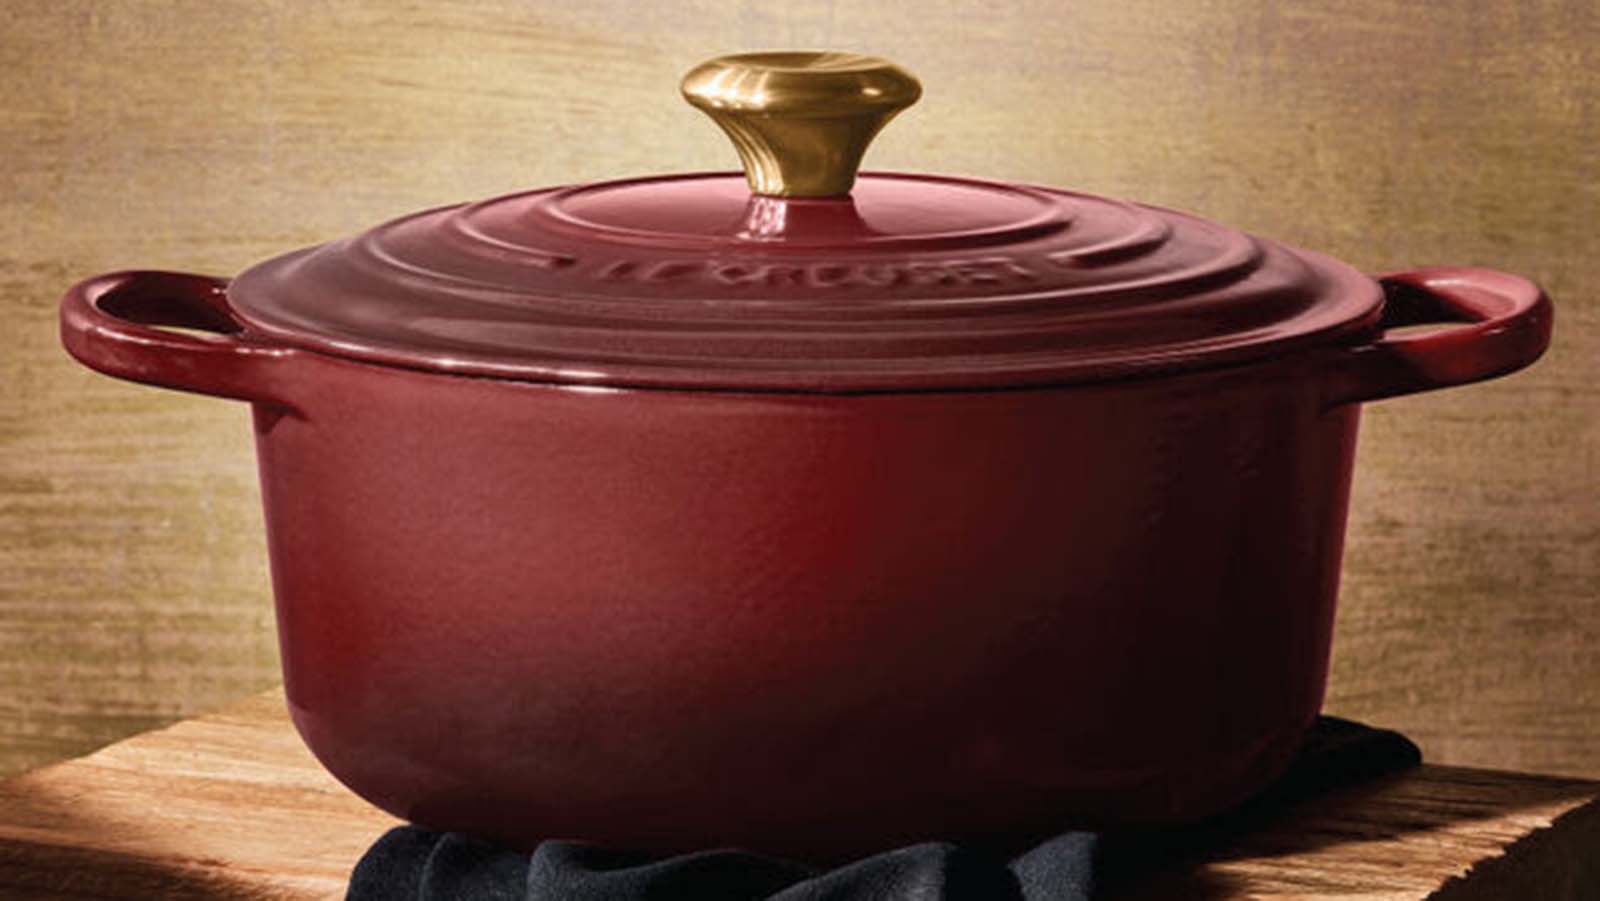 Creuset vs. Lodge: Dutch oven you need in your kitchen? | CNN Underscored